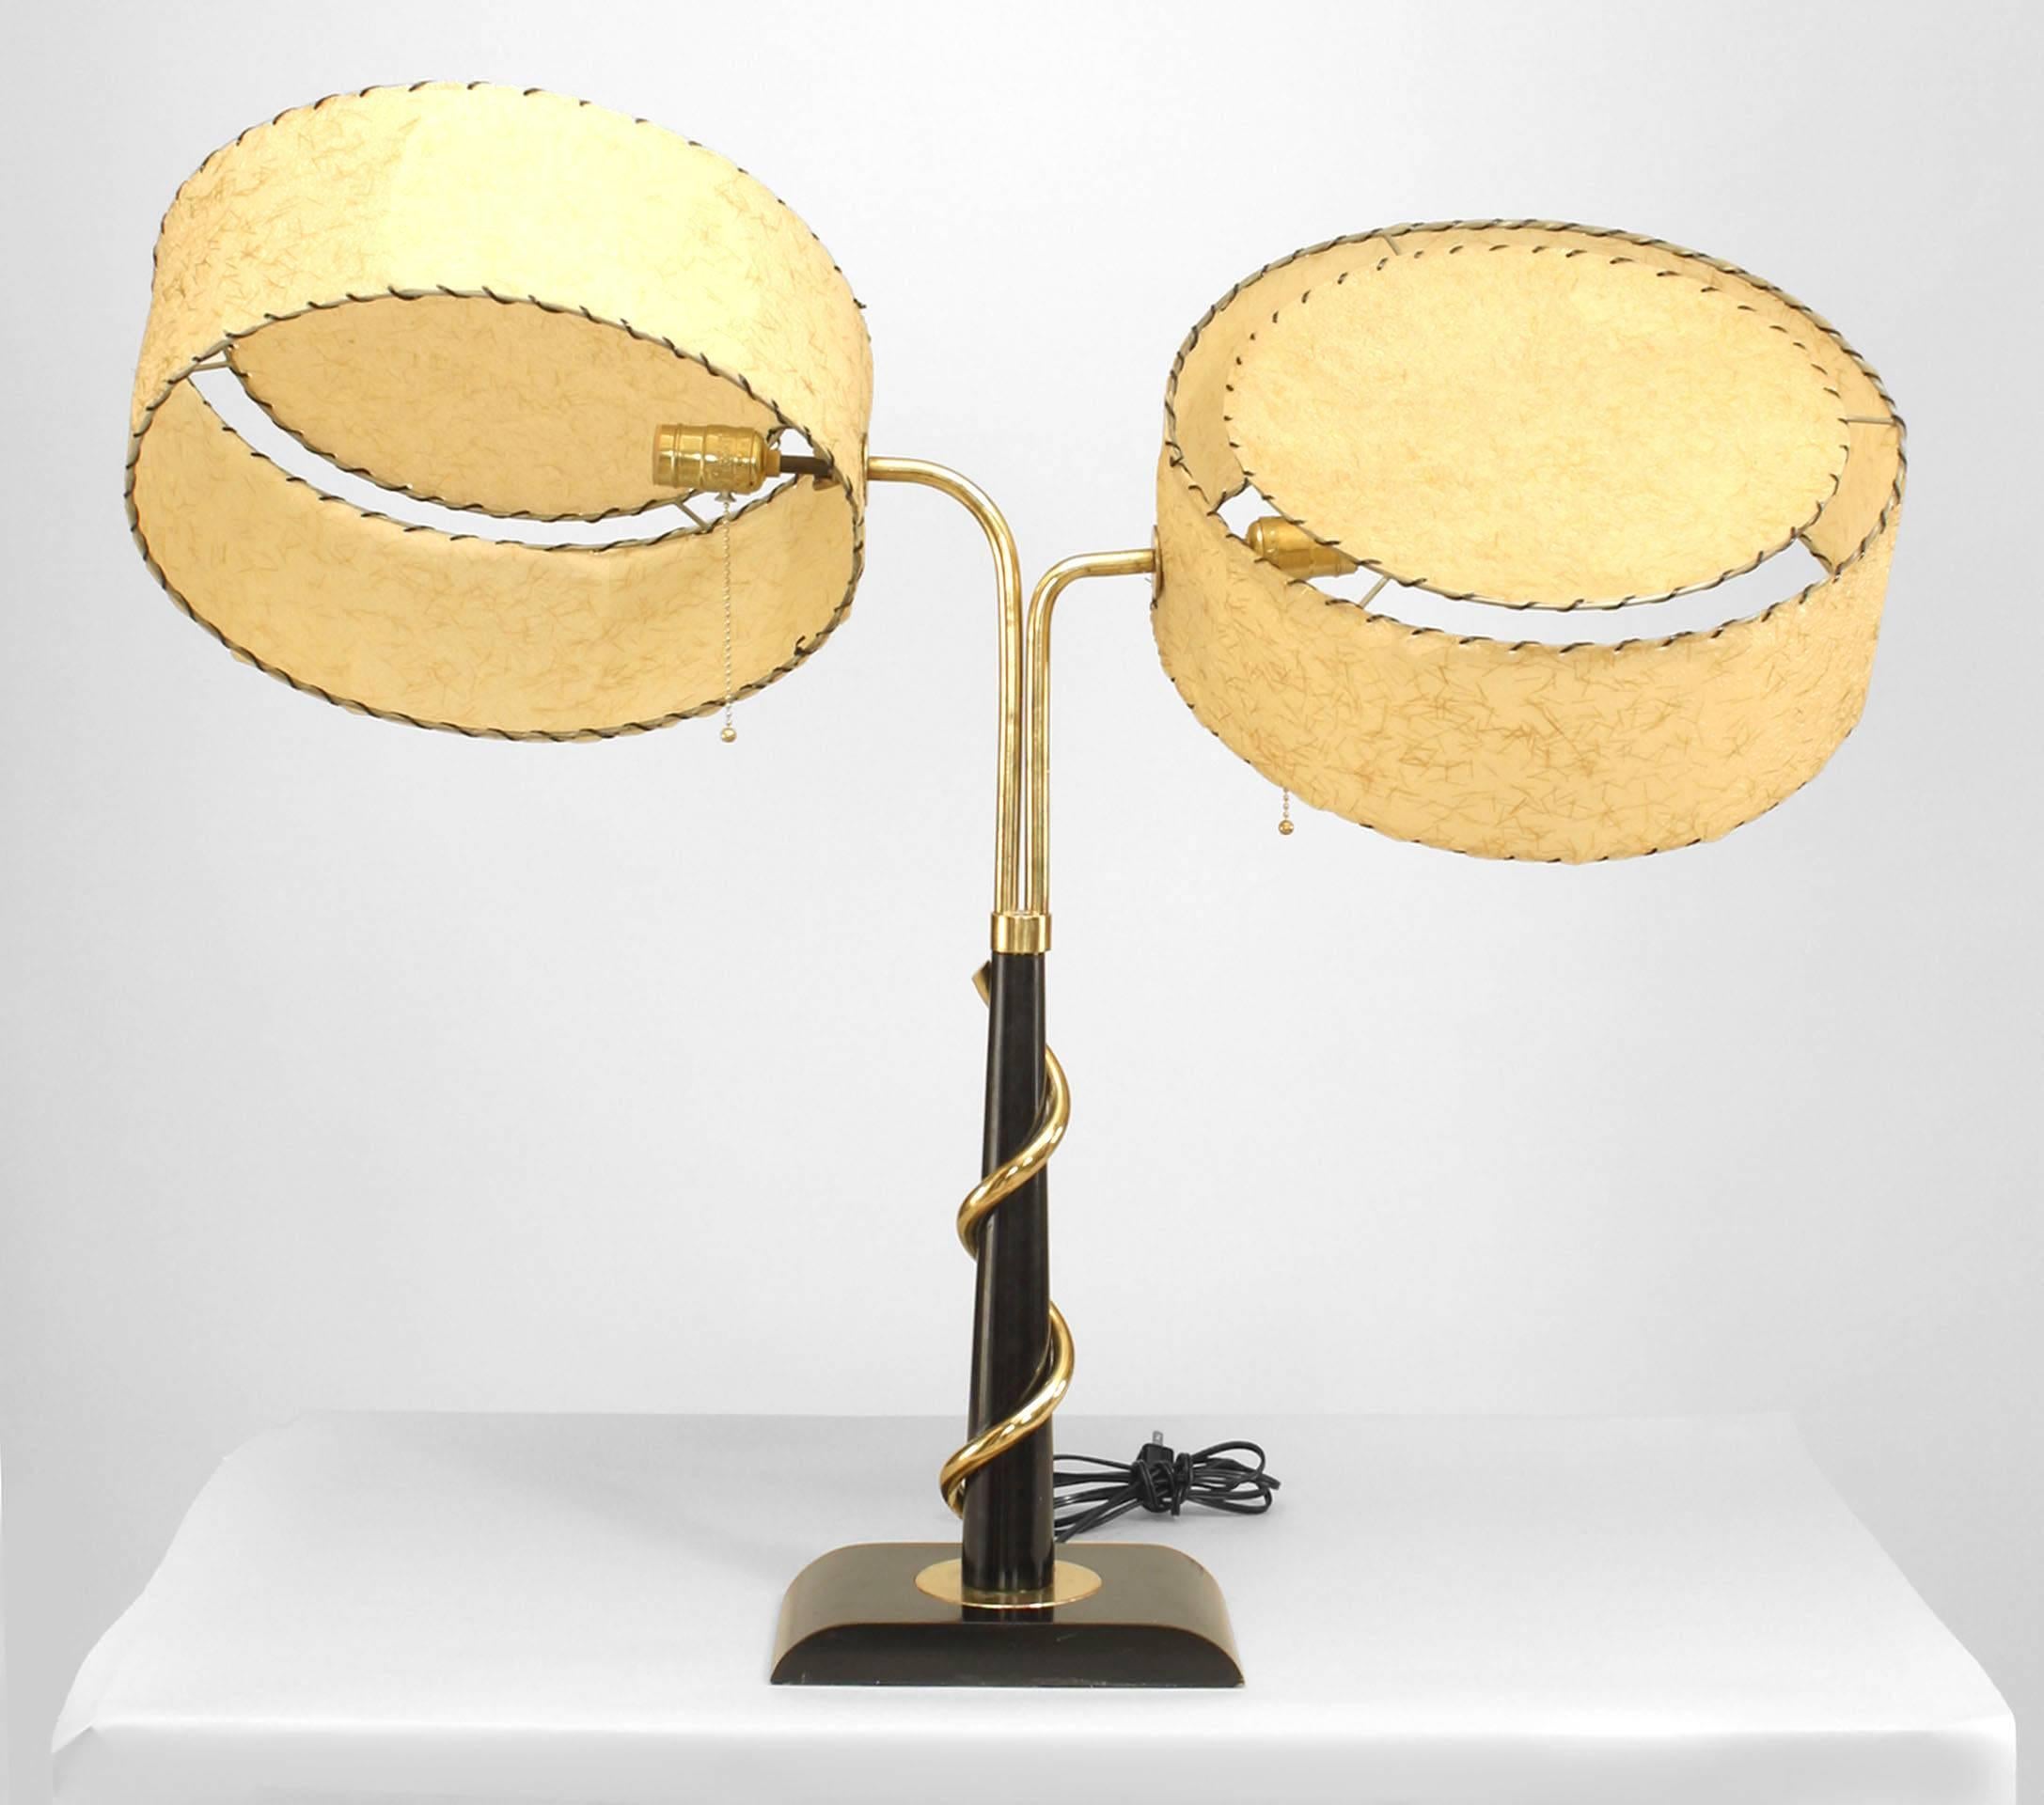 American Post-War Design 1950/60s ebonized and brass large student lamp with adjustable gold decorated drum shaped fiberglass faux parchment shades. (Attributed to MAJESTIC LAMP CO.)
